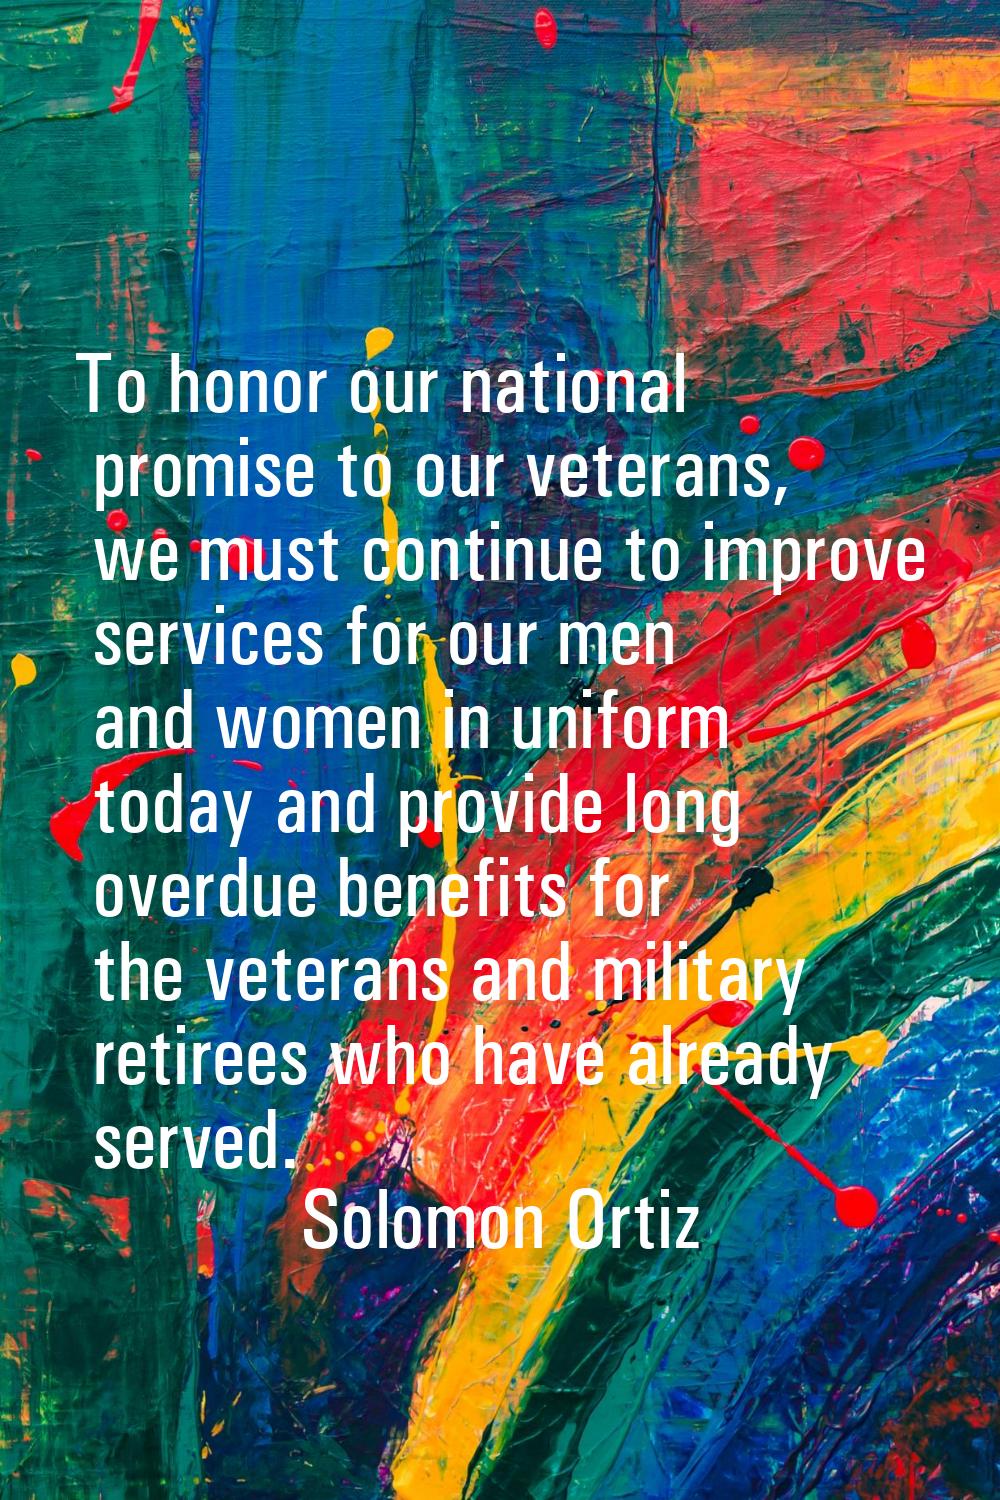 To honor our national promise to our veterans, we must continue to improve services for our men and